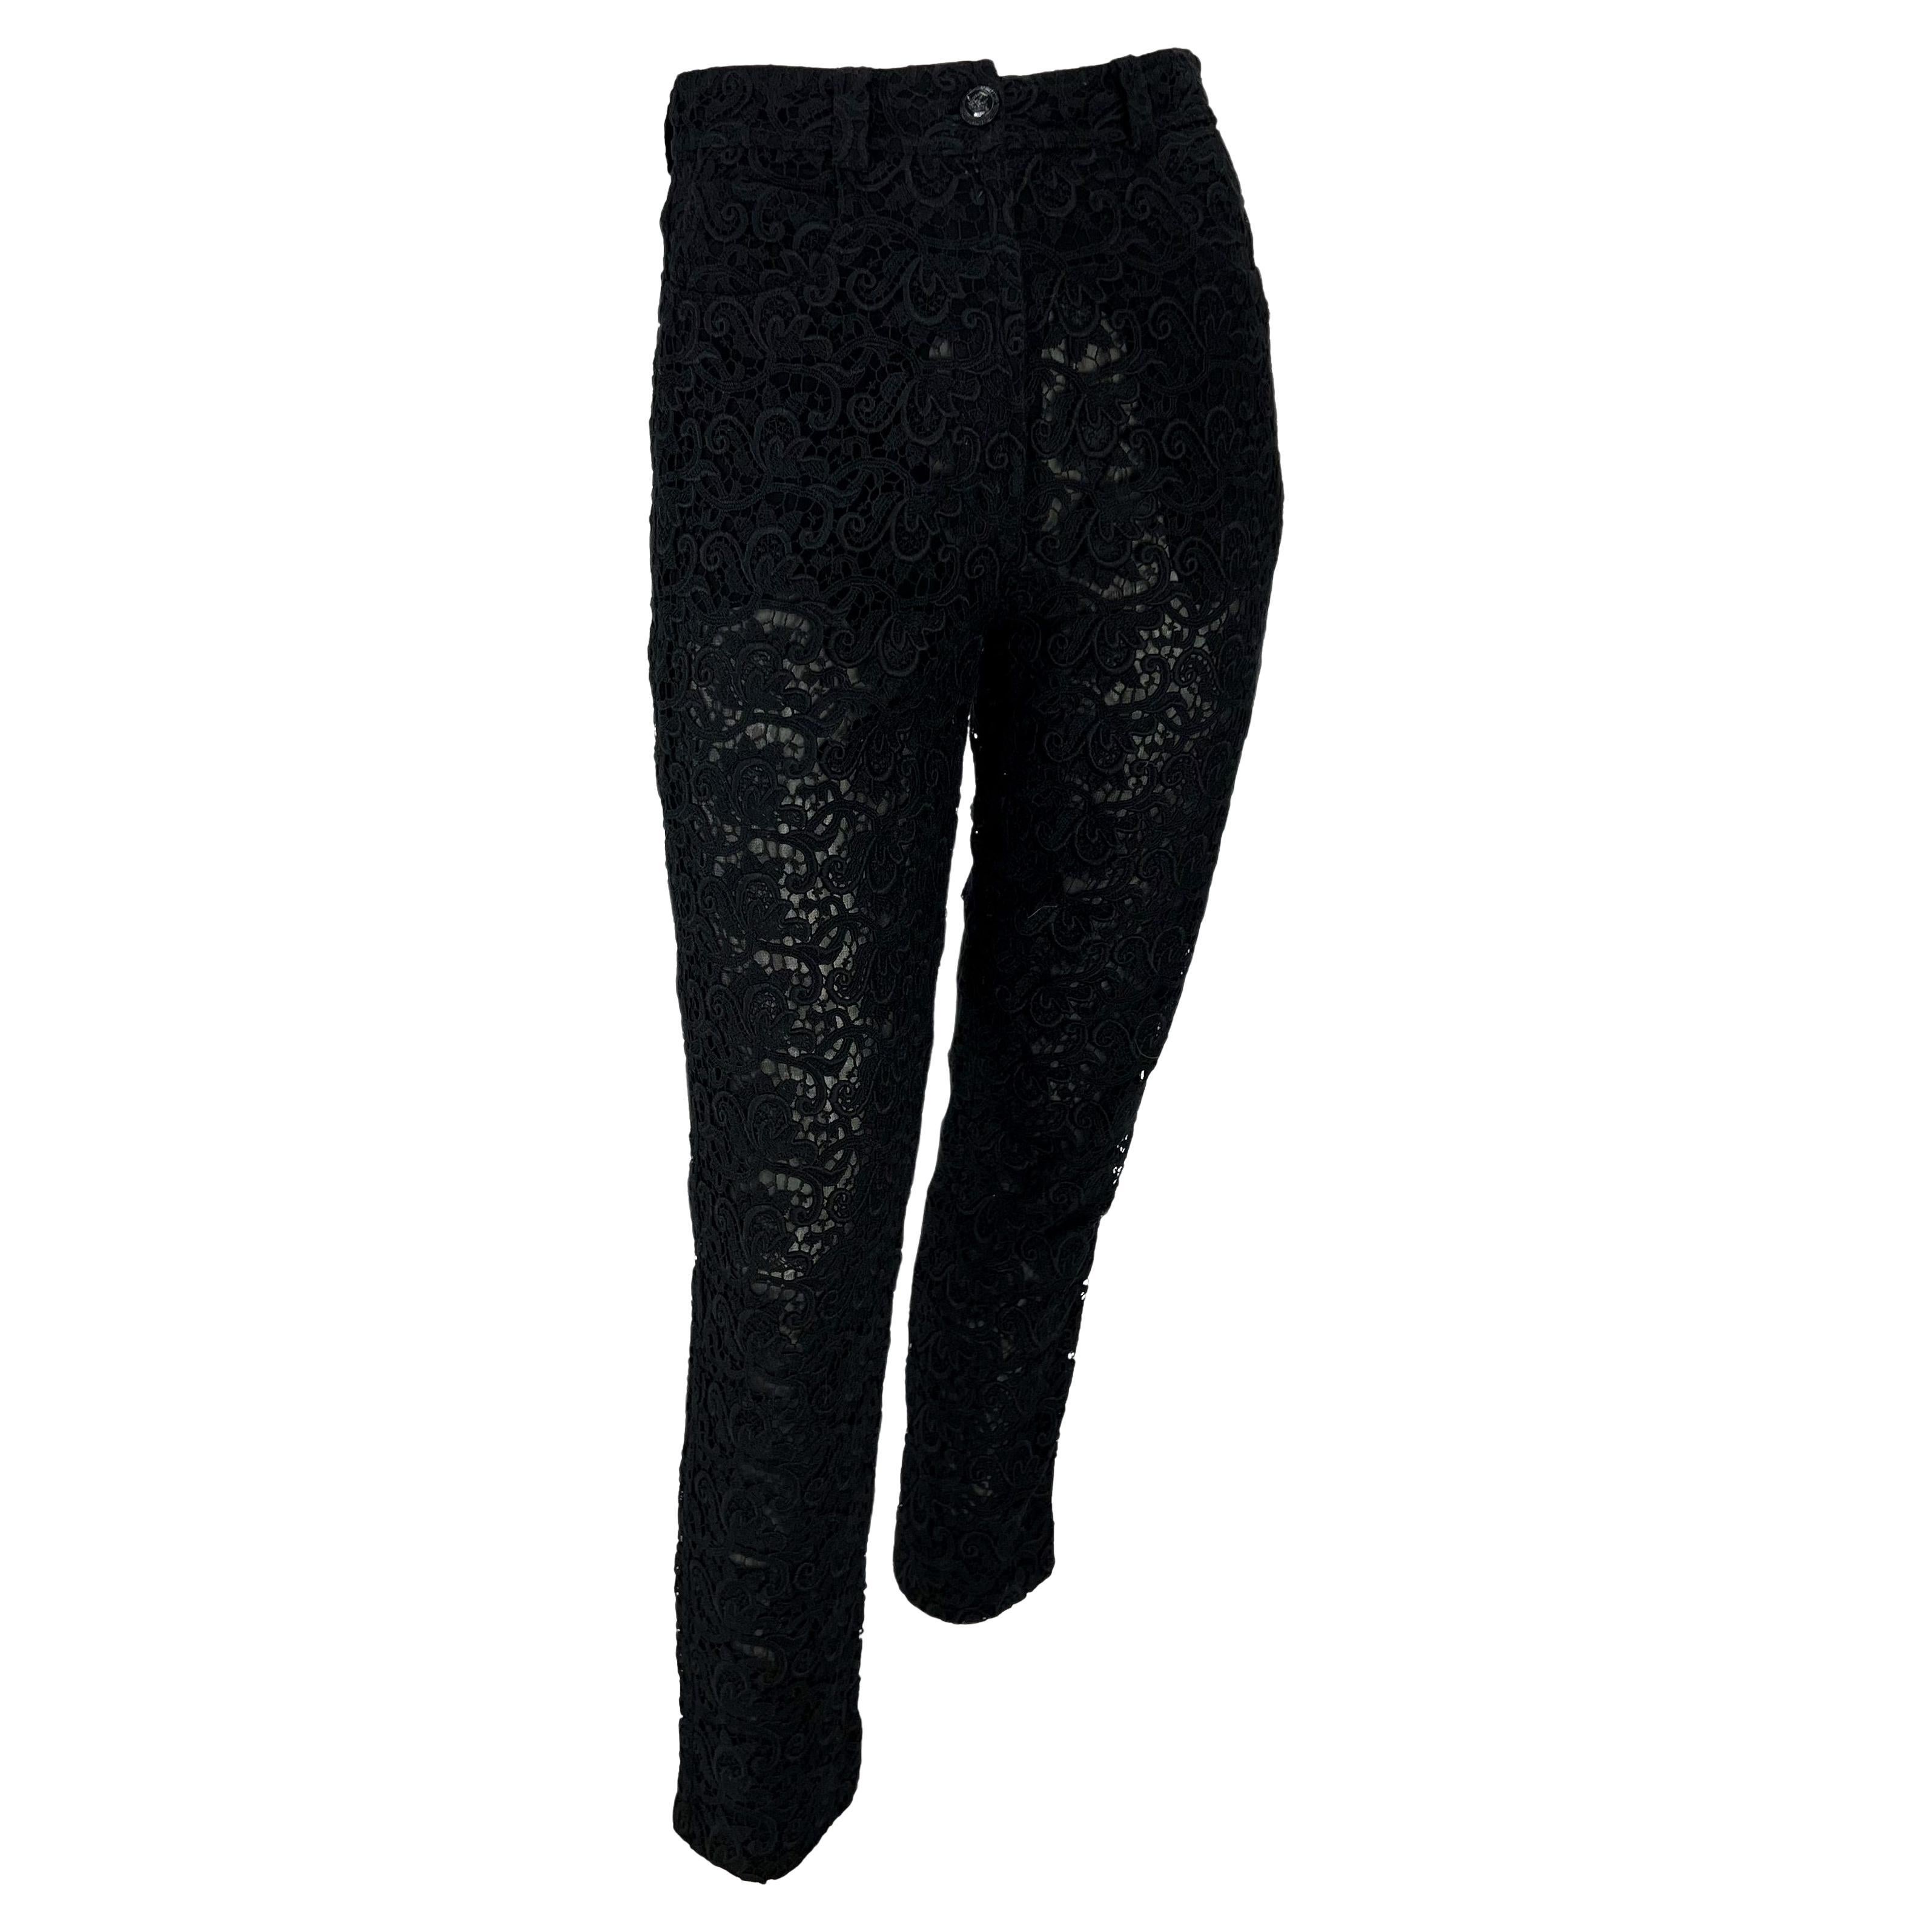 S/S 1994 Gianni Versace Sheer Black Lace Jeans Pants For Sale